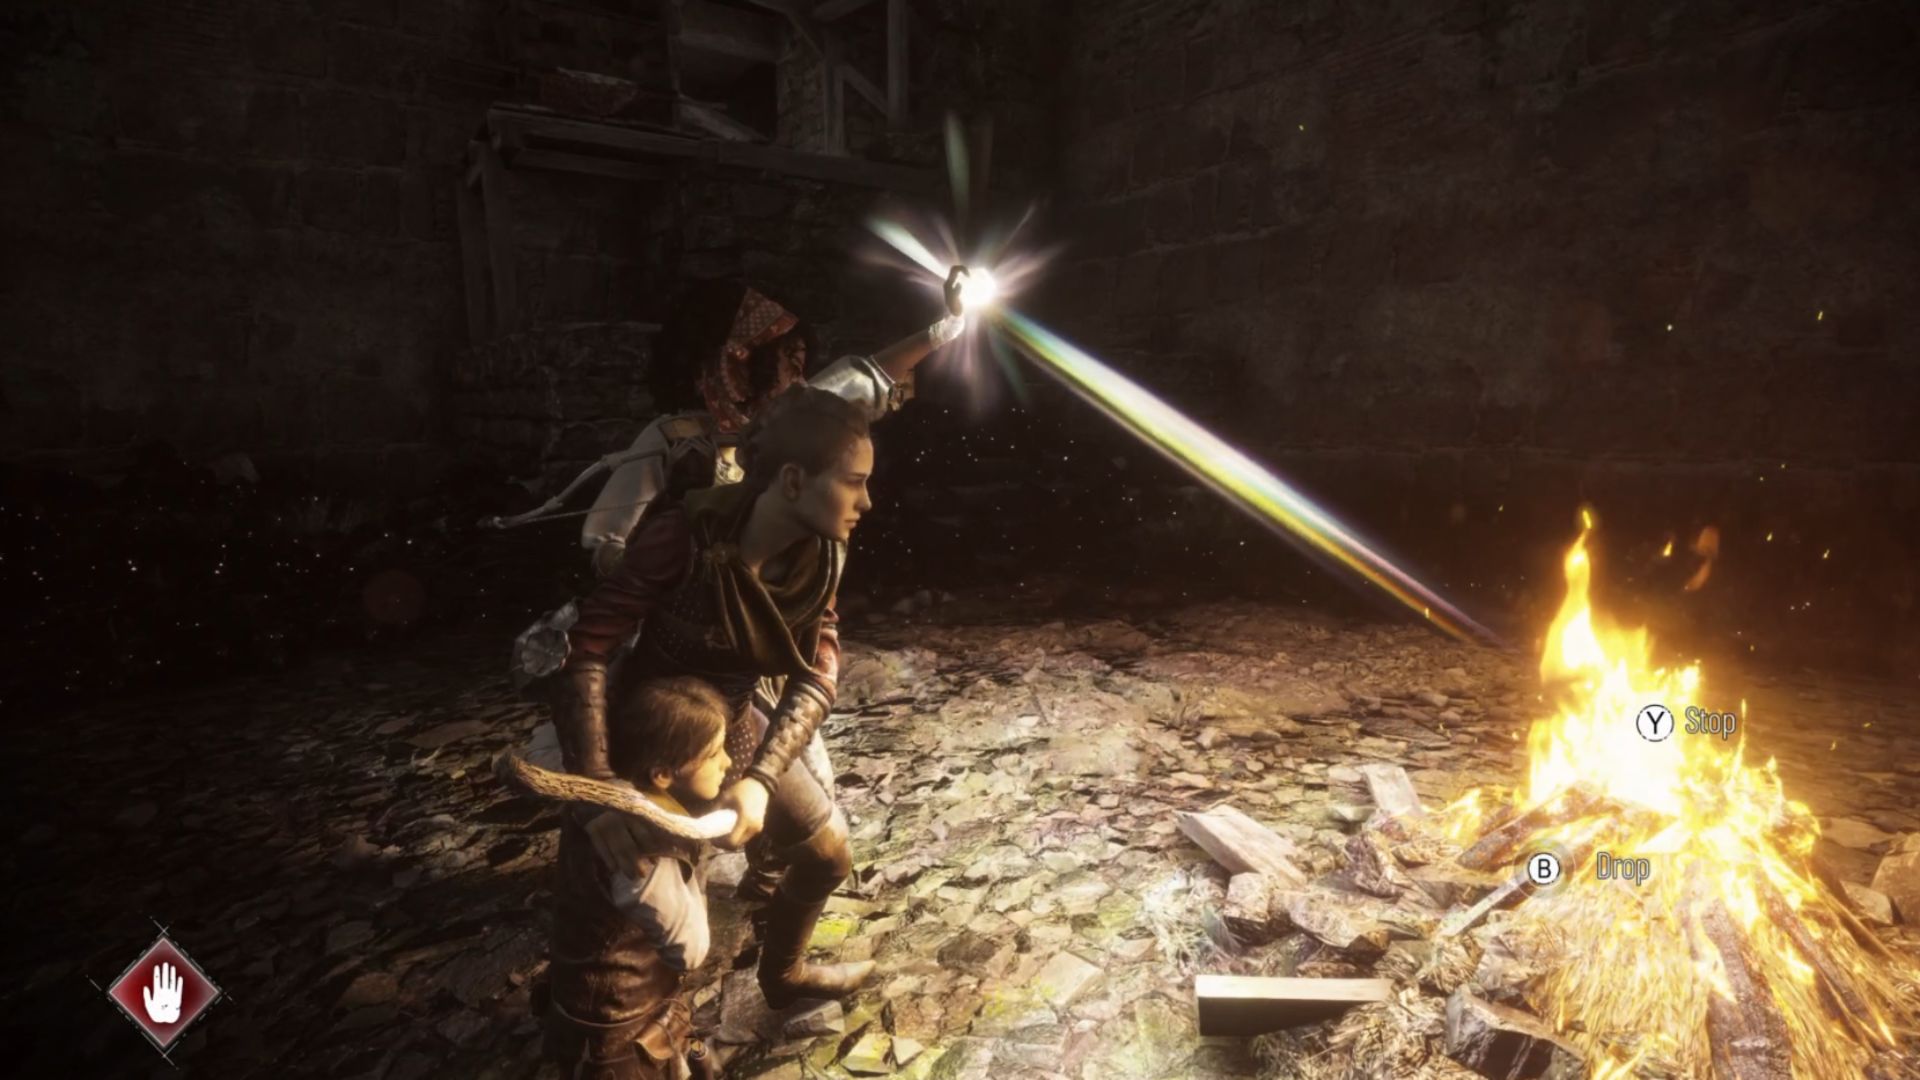 A Plague Tale Requiem Secret Chest Locations: Amicia can be seen using Sophia's light to reach the room